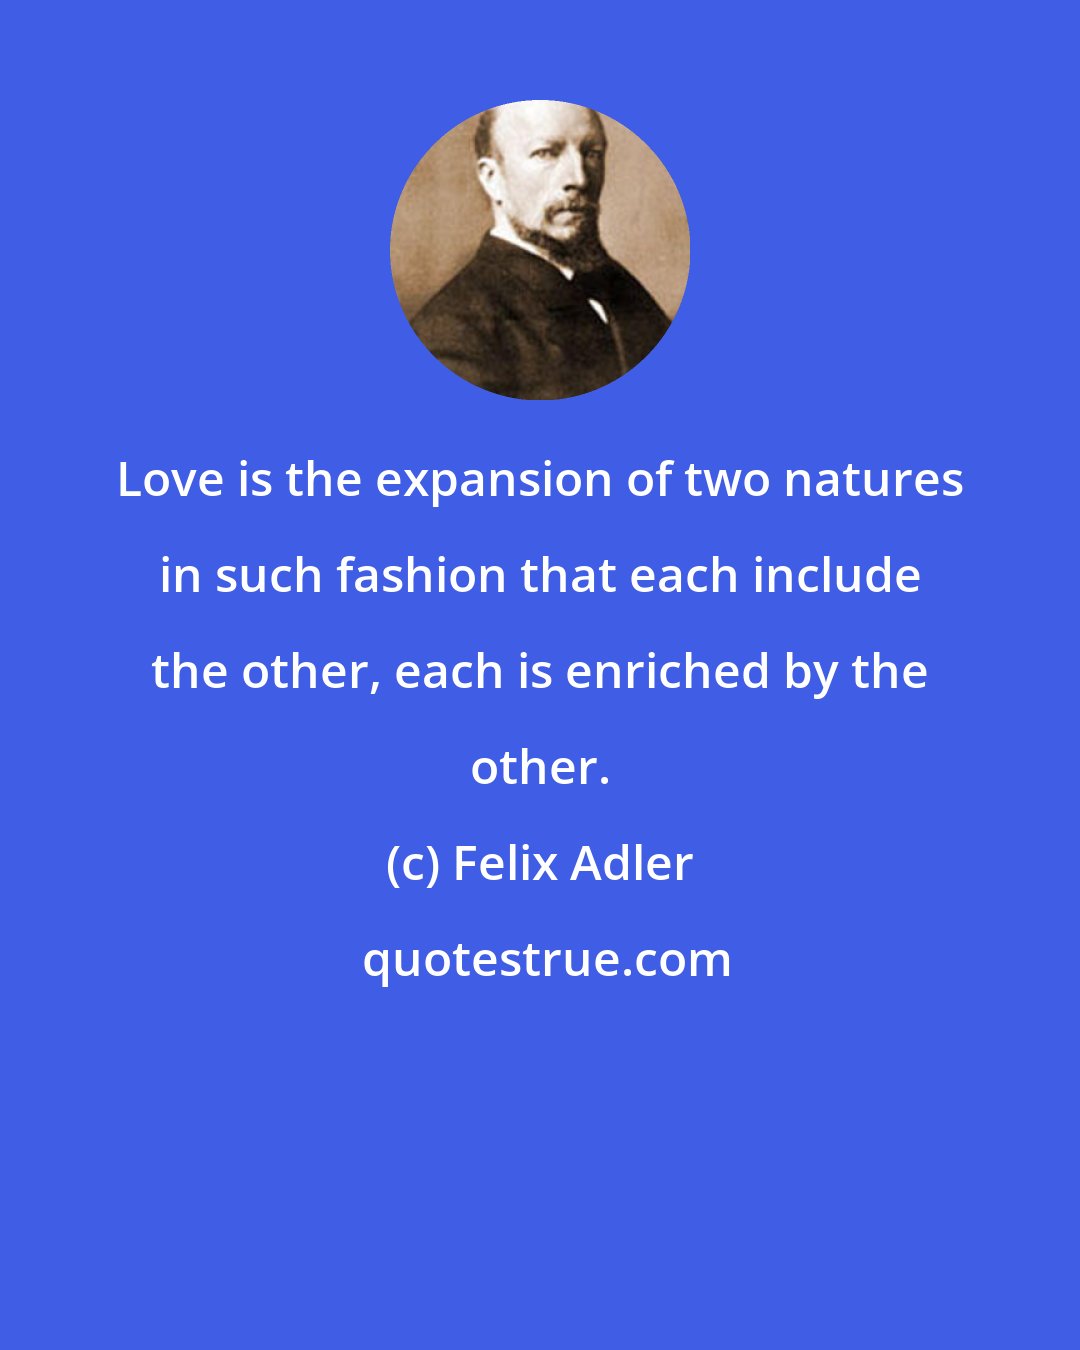 Felix Adler: Love is the expansion of two natures in such fashion that each include the other, each is enriched by the other.